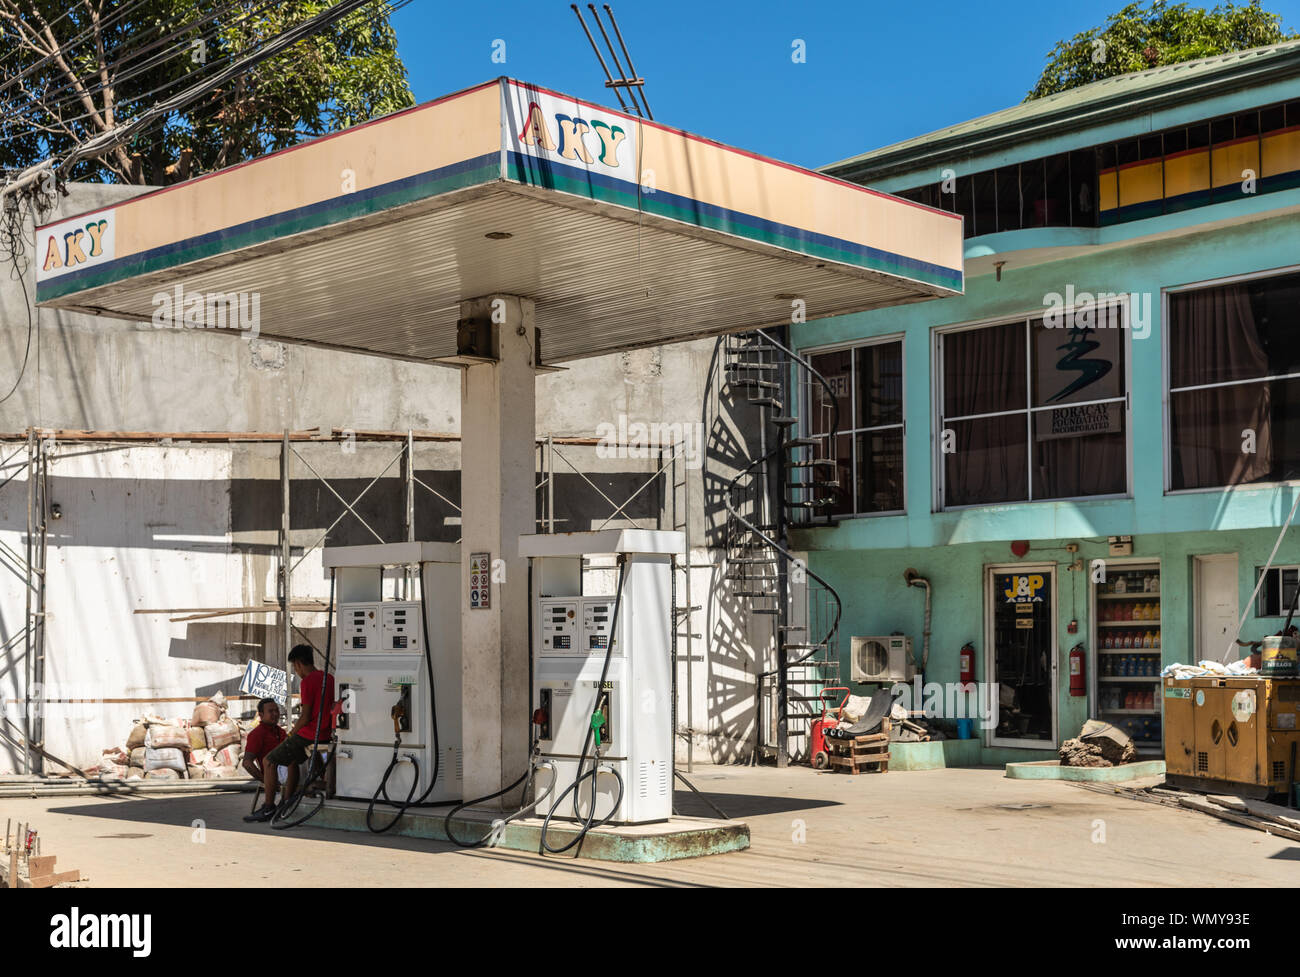 Manoc-Manoc, Boracay, Philippines - March 4, 2019: Small AKY gas station with mechanicla service building in back. Two servers wait for customers. Blu Stock Photo